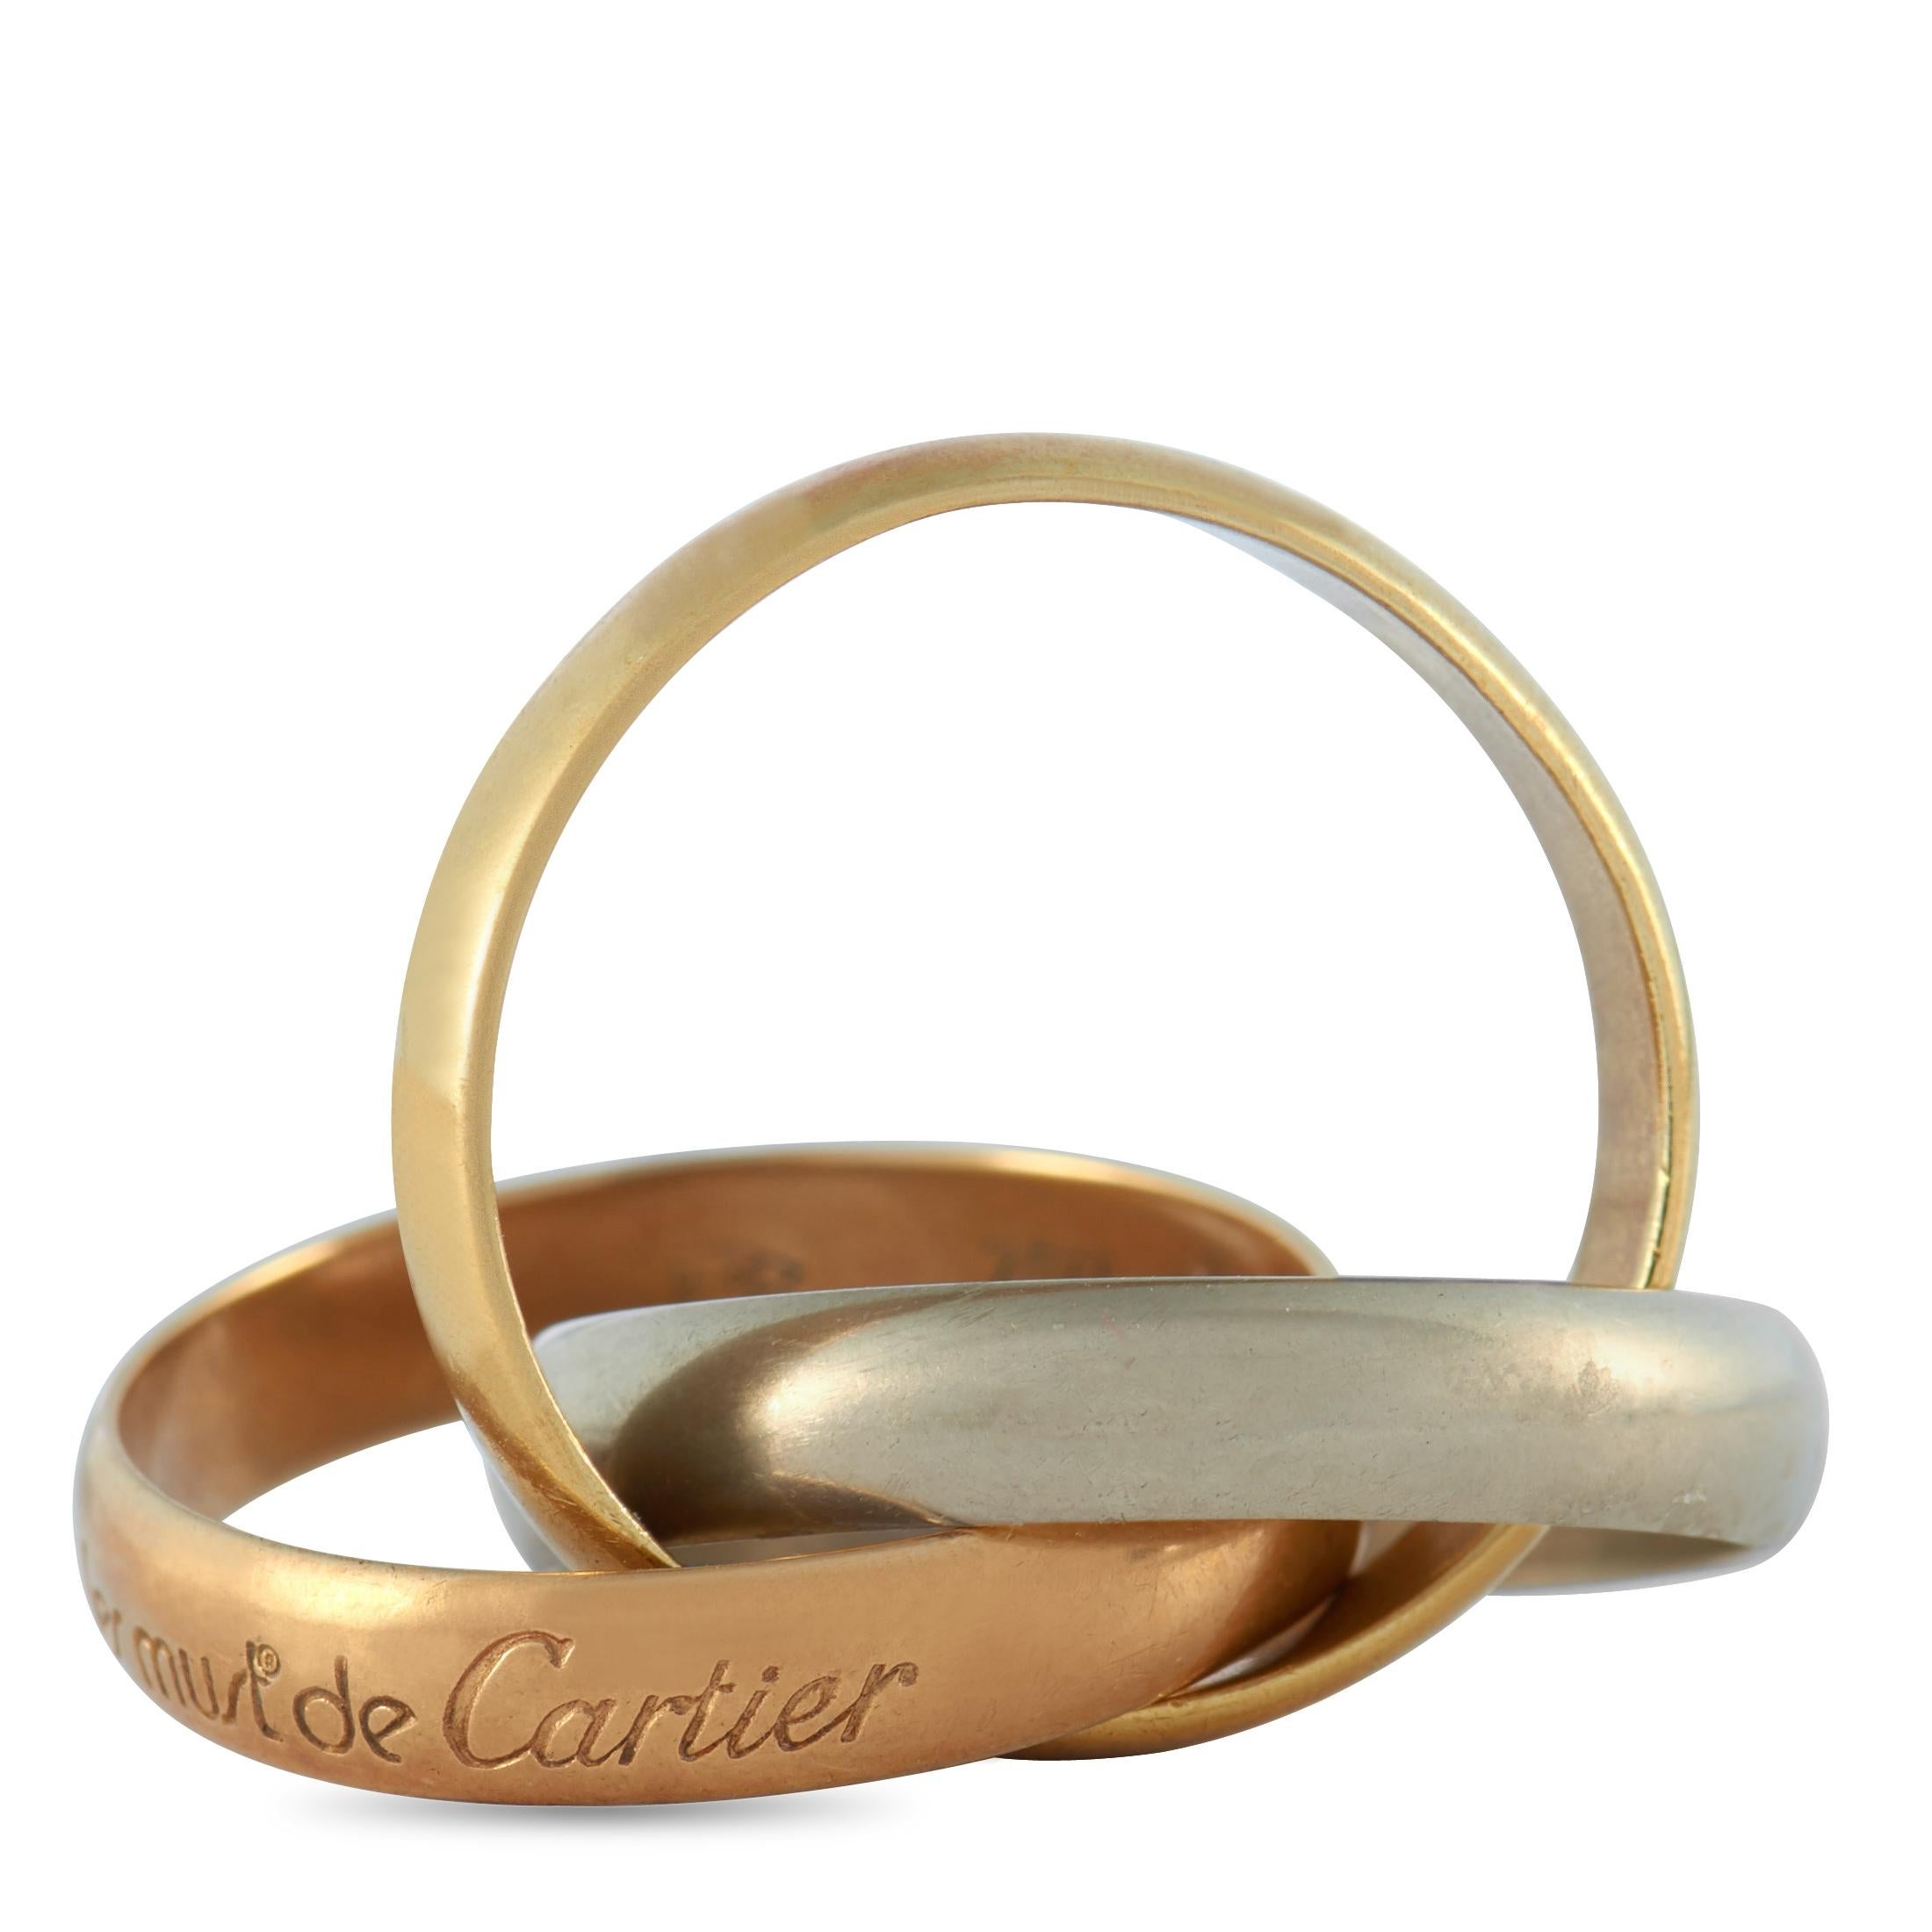 The Cartier “Trinity” ring is made out of 18K white, yellow and rose gold and weighs 7.3 grams, boasting band thickness of 8 mm.
 
 This jewelry piece is offered in estate condition and includes the manufacturer’s box.
